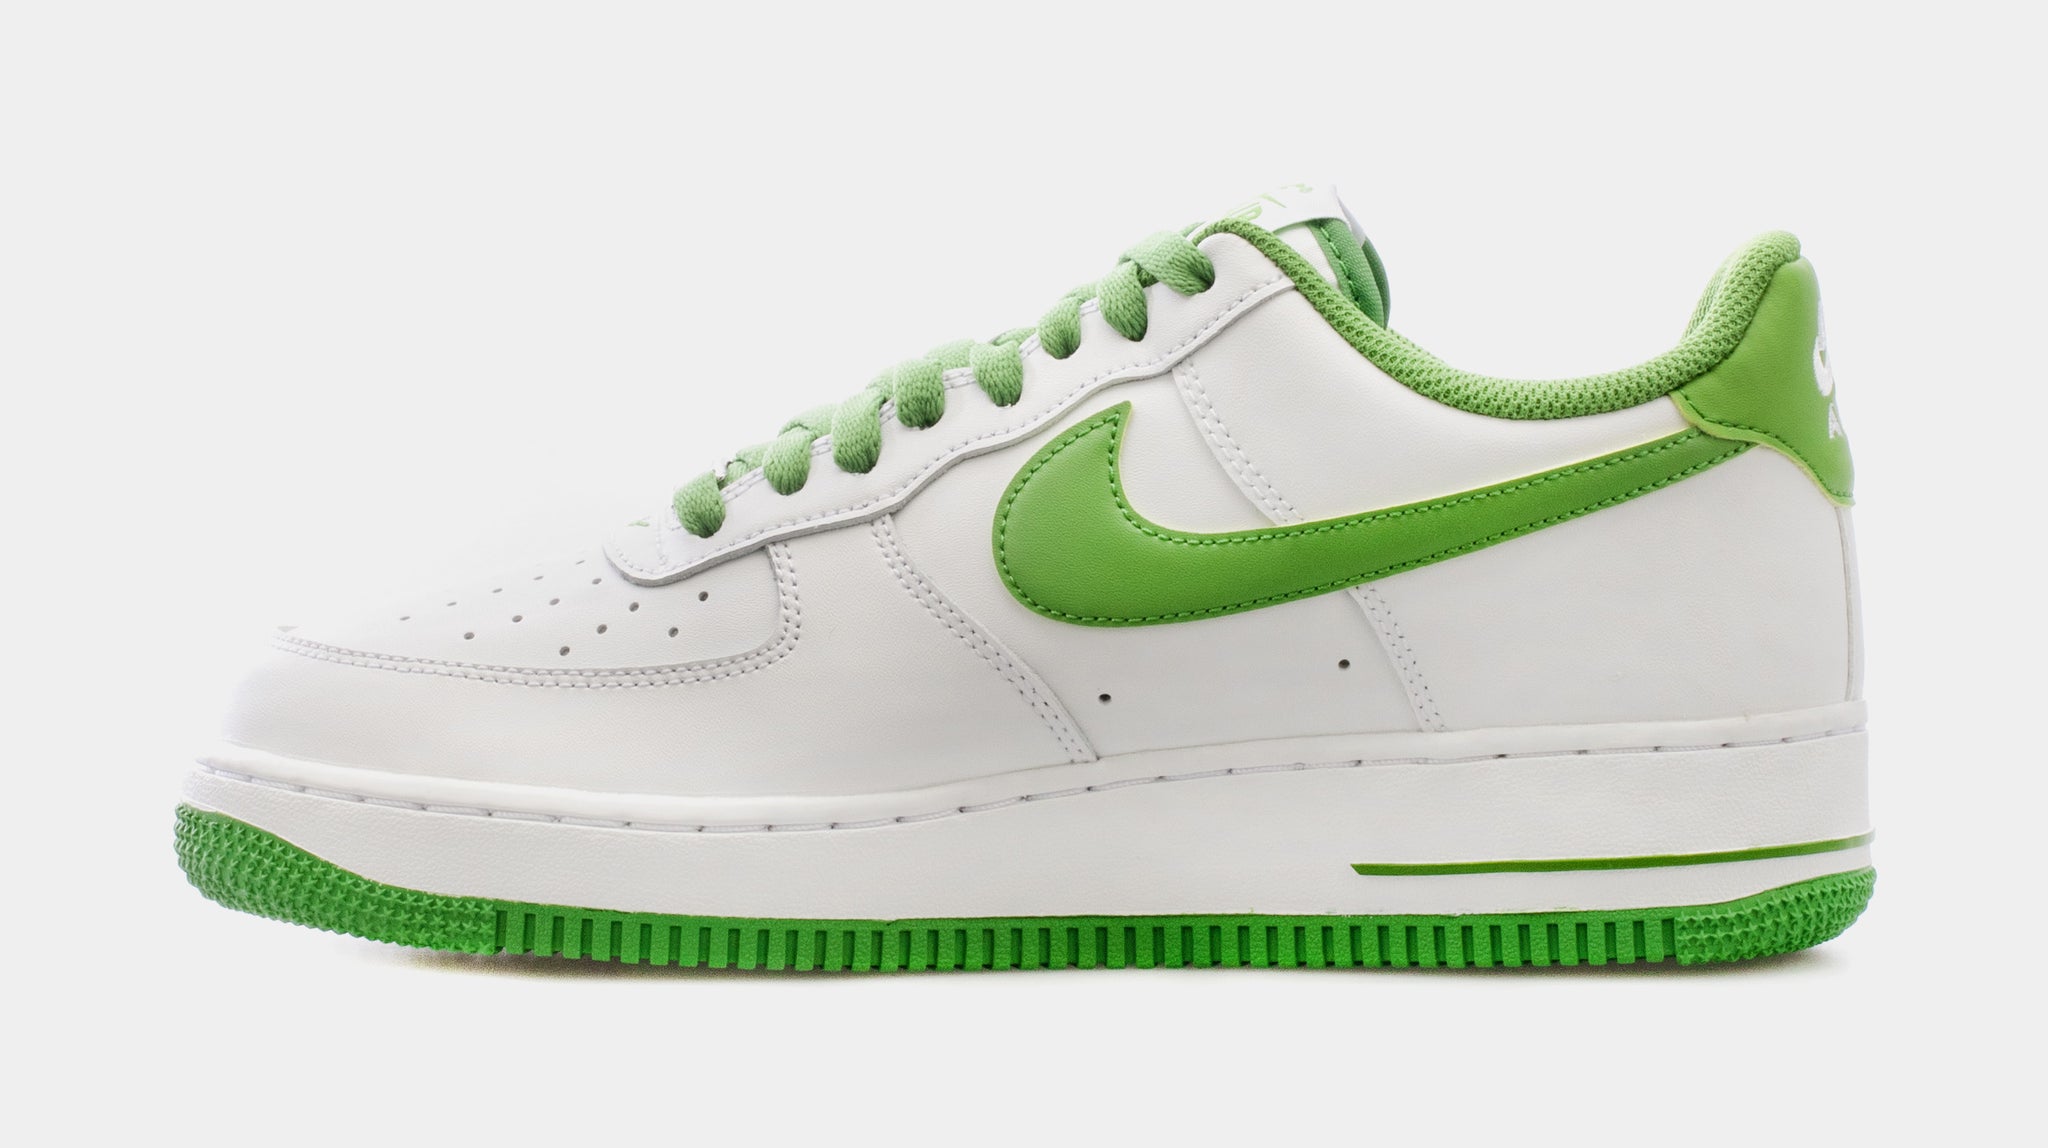 Nike Air Force 1 07 Chlorophyll Mens Lifestyle Shoes Green White